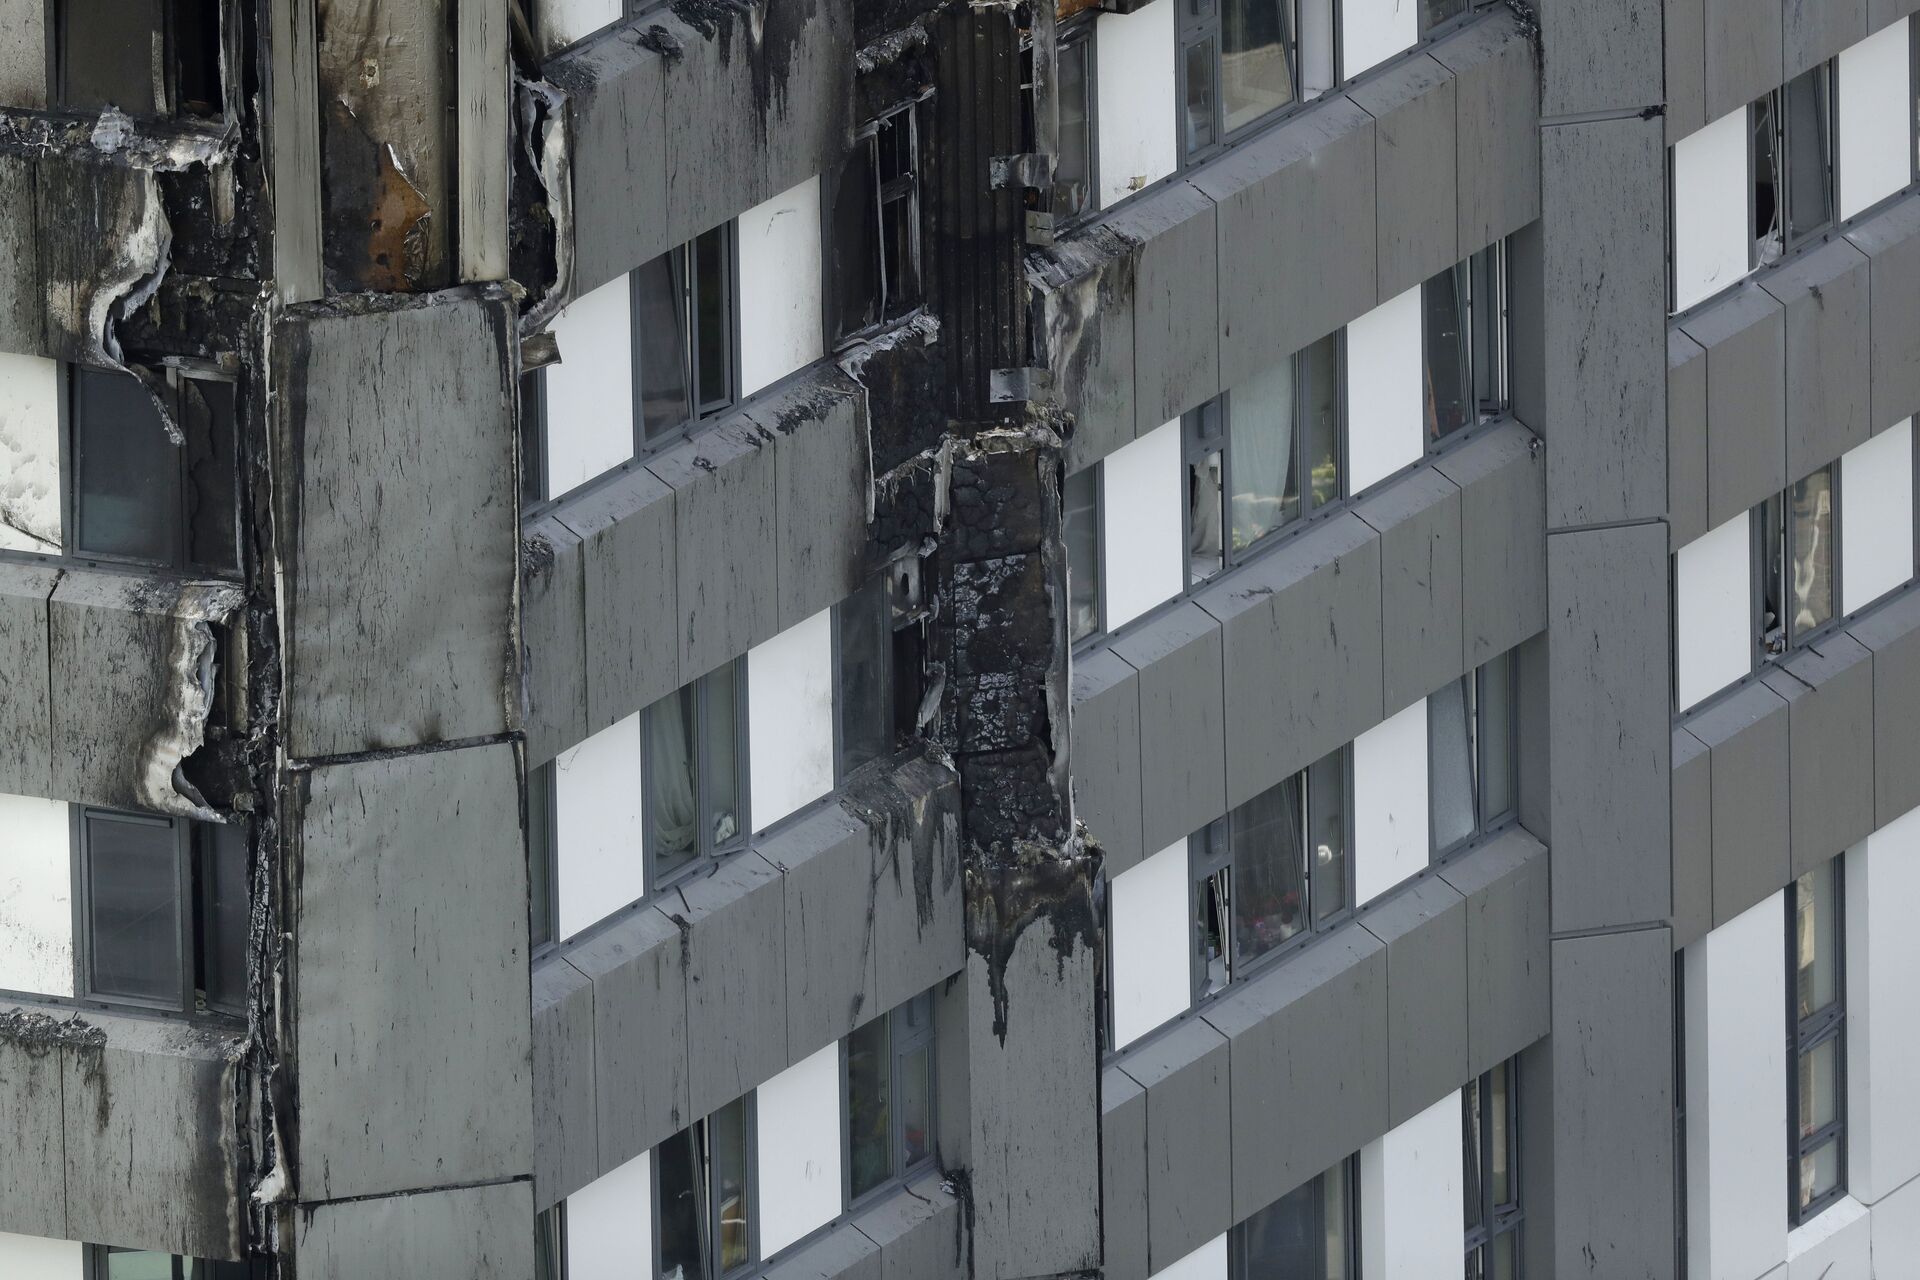 Fire damaged cladding is seen on the lower floors of the fire-gutted Grenfell Tower in London, Friday, June 16, 2017, after a fire engulfed the 24-story building Wednesday morning - Sputnik International, 1920, 10.09.2021